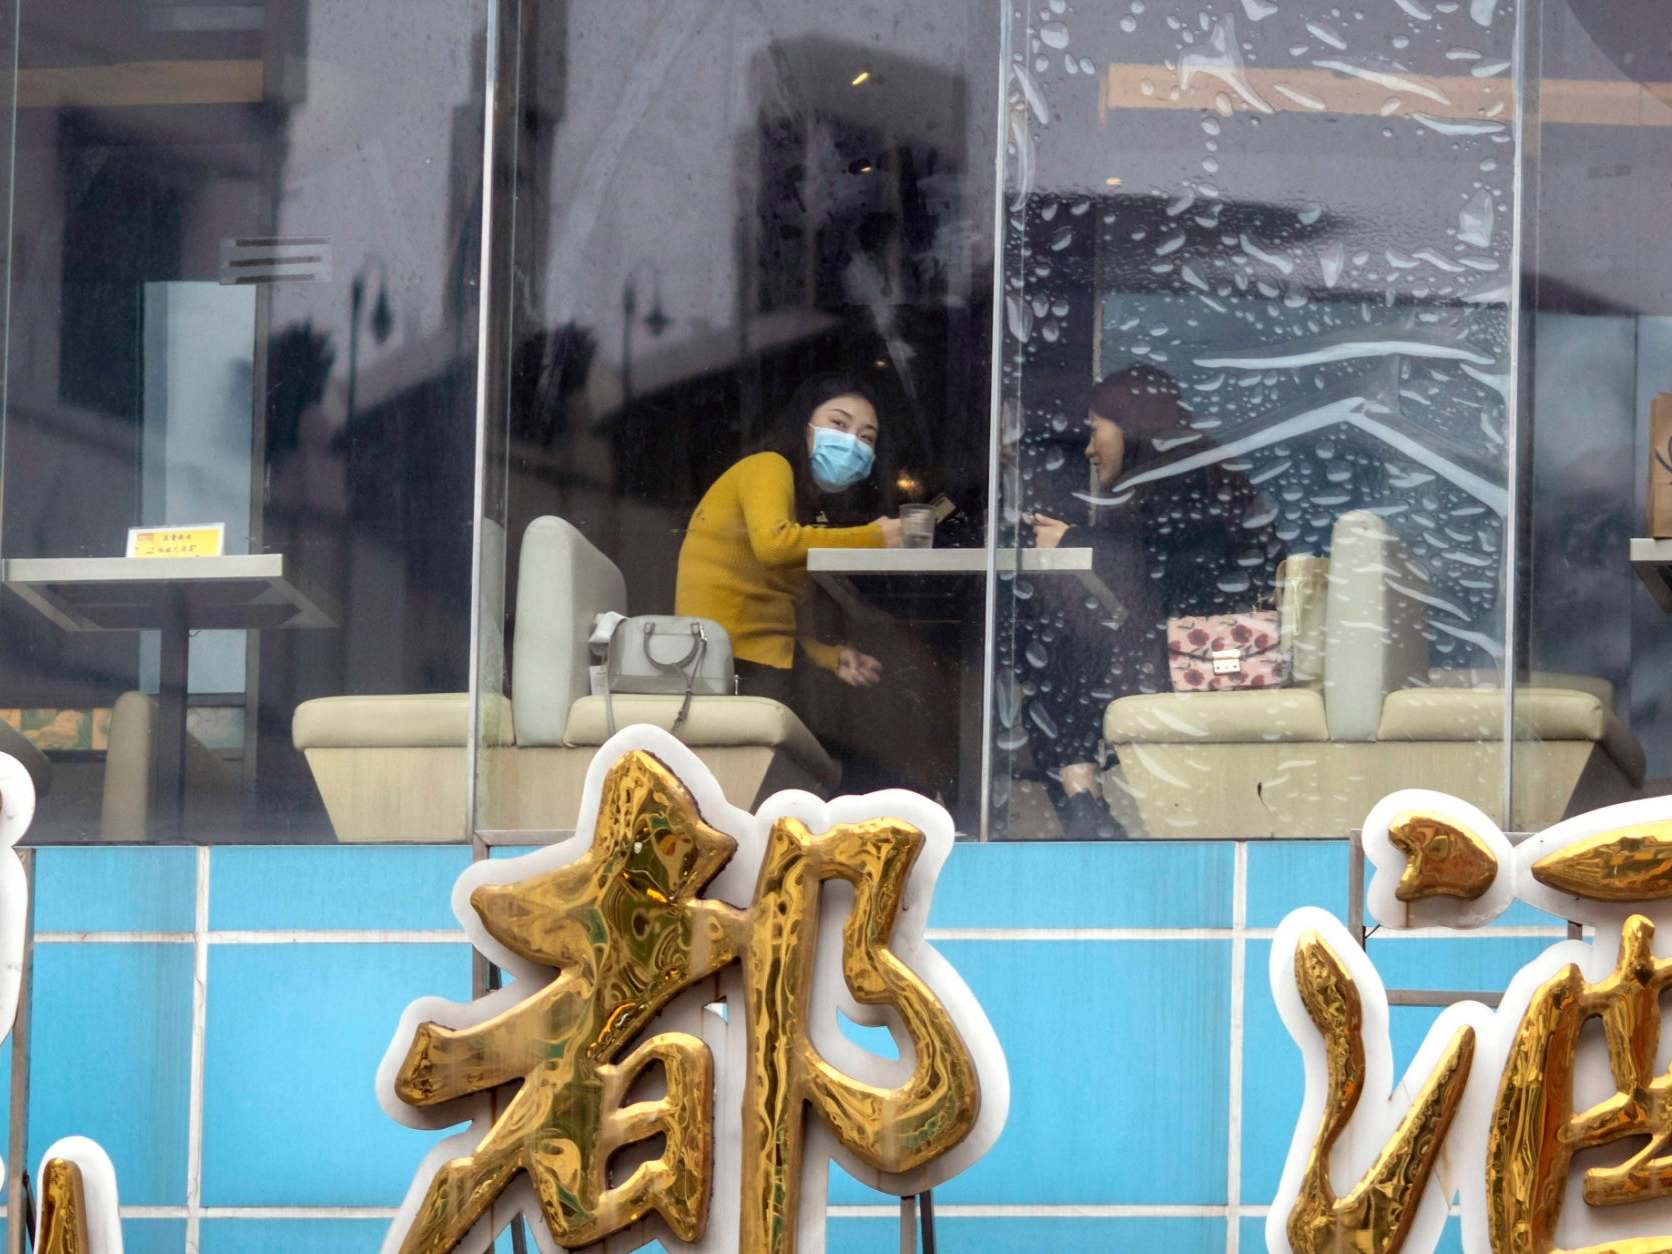 People eat at a restaurant in Guangzhou, China on 23 April. A study conducted at a different restaurant in January found that the coronavirus was spread by an air-conditioning unit (EPA/ALEX PLAVEVSKI)